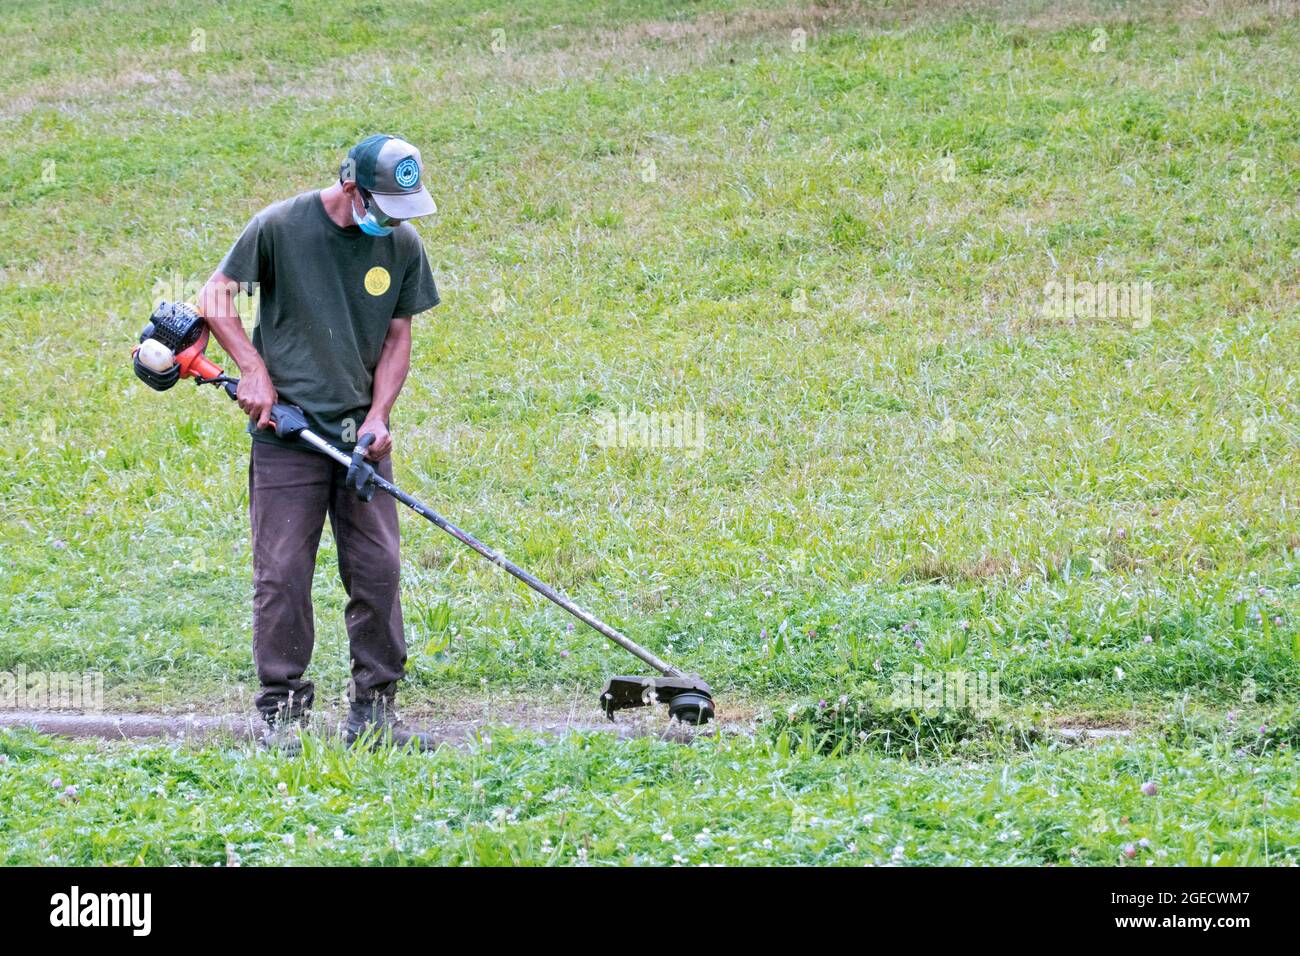 A New York City Parks Department worker uses a weed whacker to trim growth near a curb in a park in Queens, New York City. Stock Photo